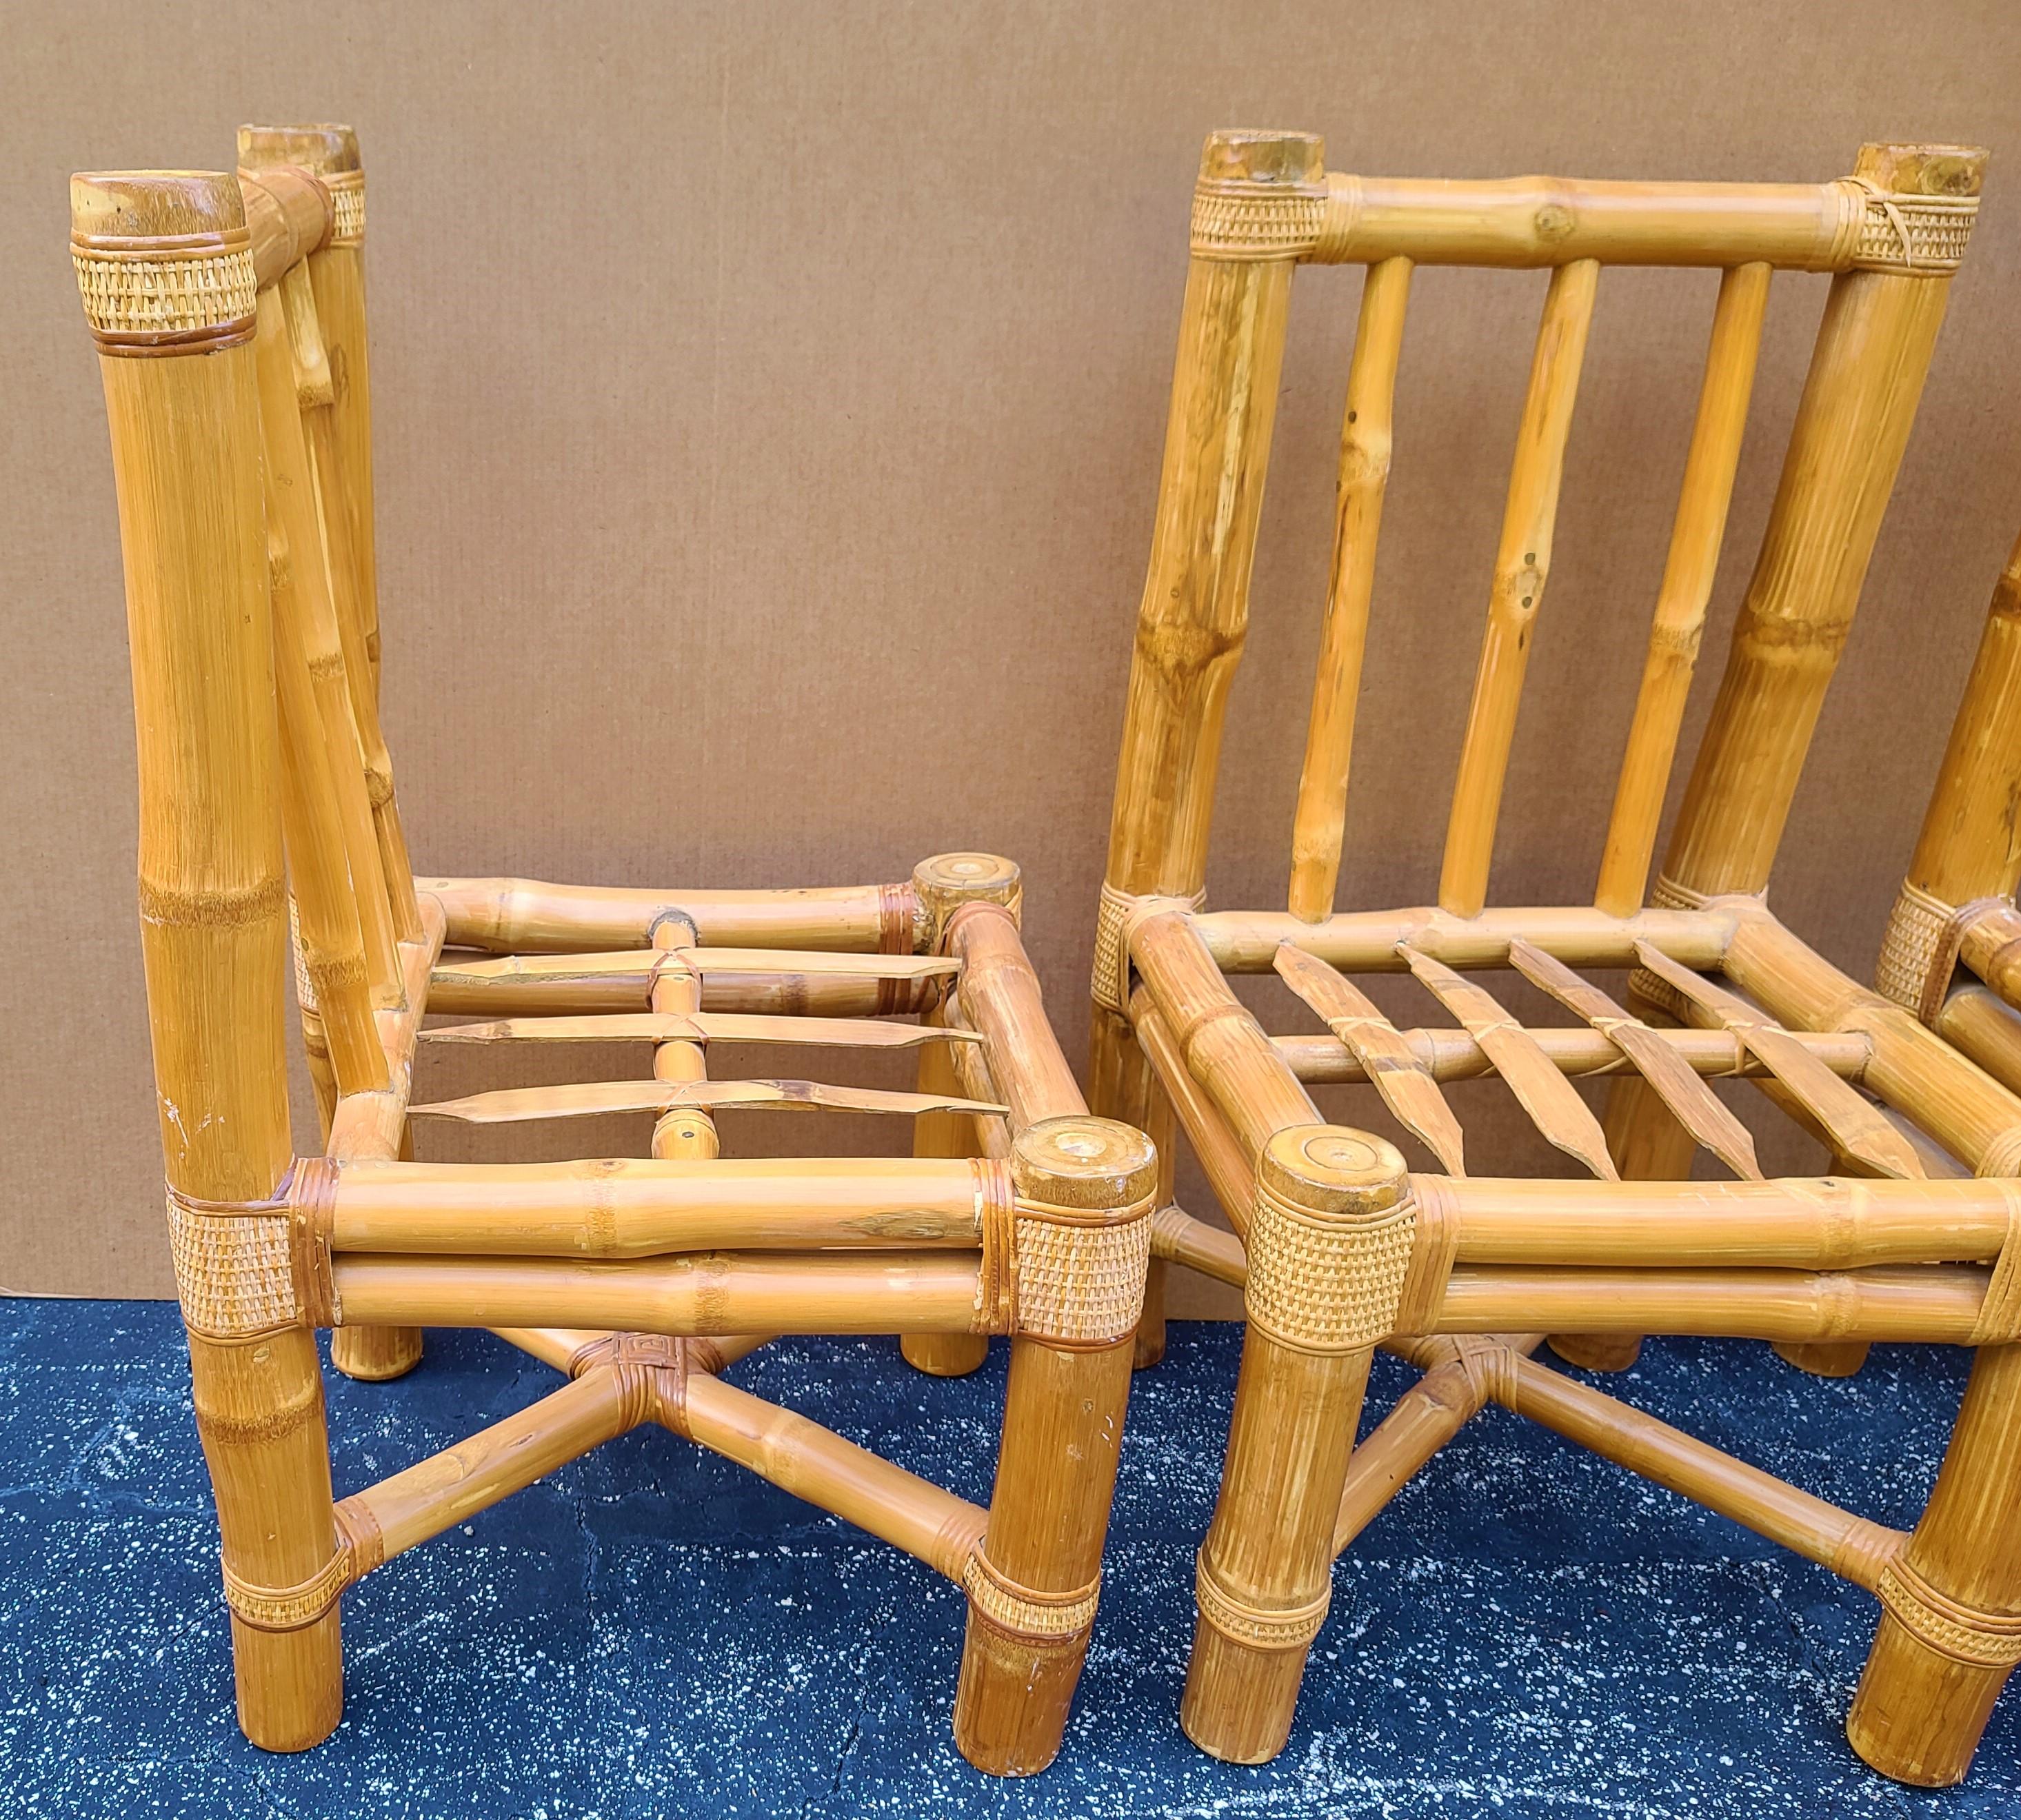 Vintage Elephant Bamboo Rattan Dining Chairs with Cushions - Set of 6 In Good Condition For Sale In Lake Worth, FL